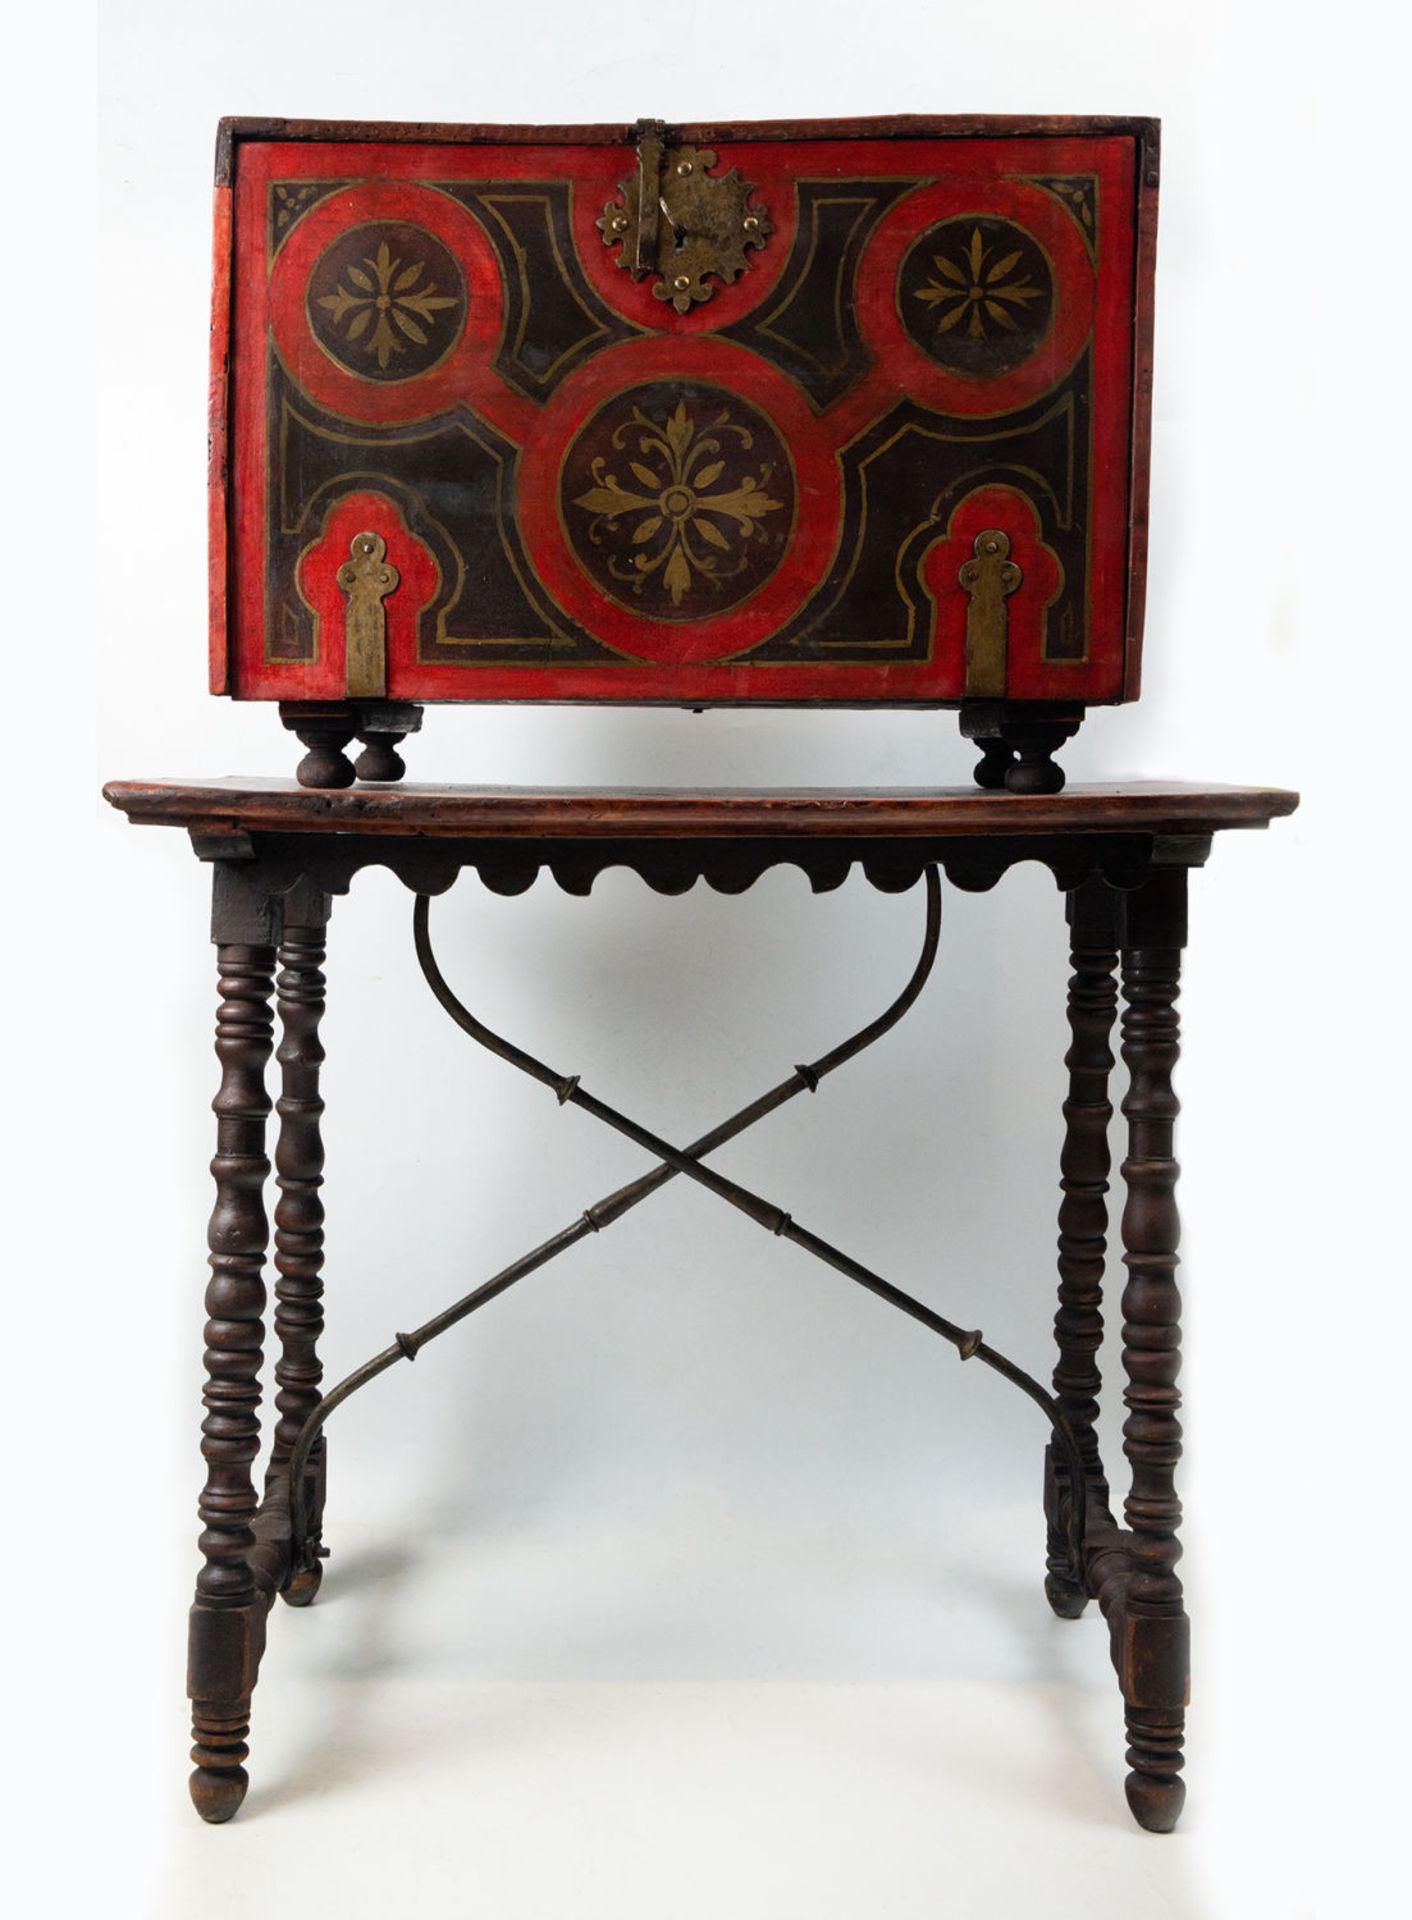 Mexican colonial style chest, 19th century - Image 8 of 8